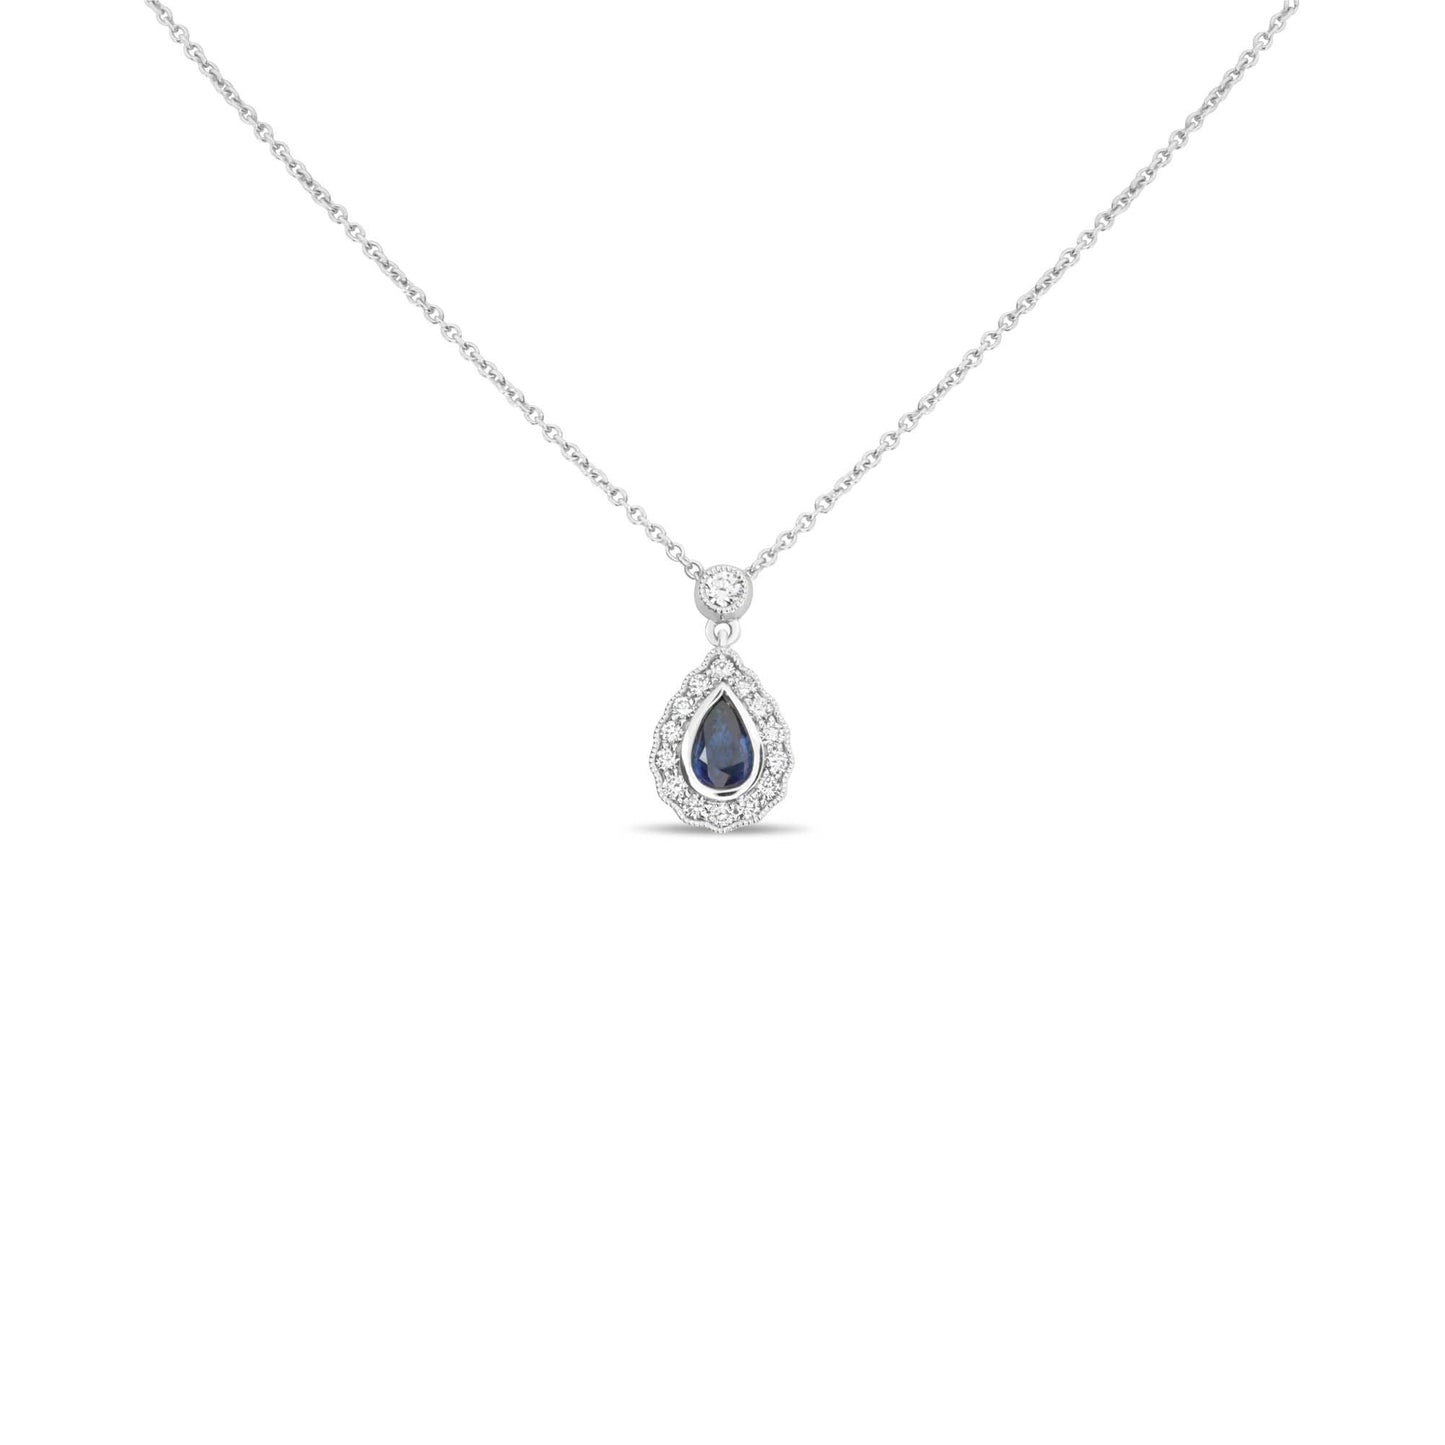 Pear-shaped Sapphire Halo Necklace